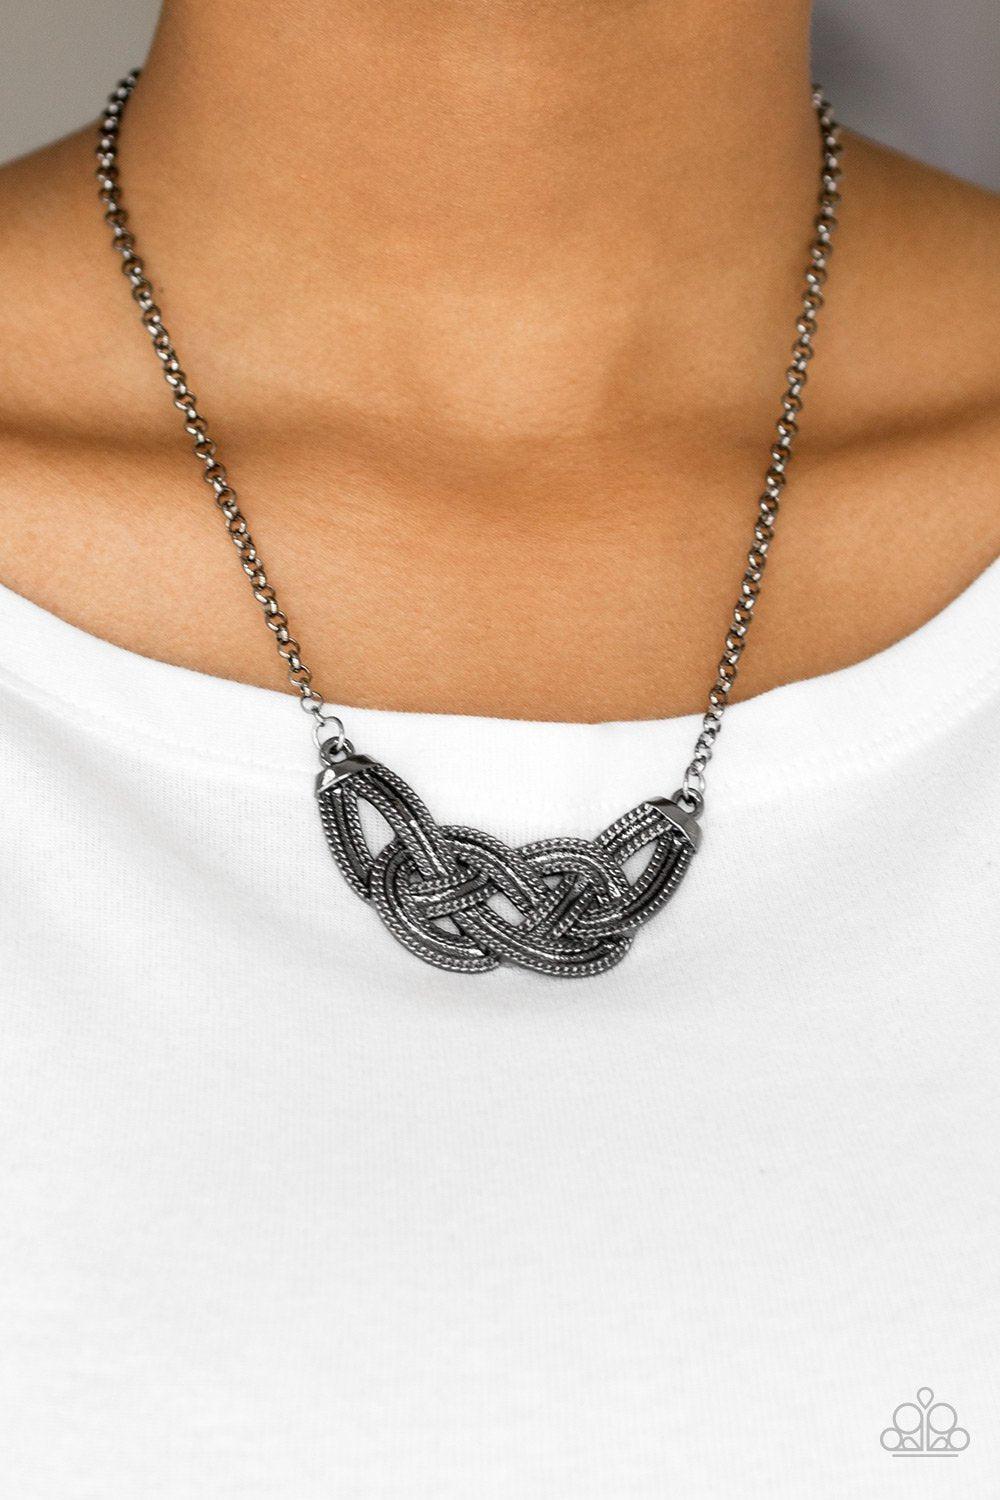 Nautically Naples Black Gunmetal Necklace and matching Earrings - Paparazzi Accessories-CarasShop.com - $5 Jewelry by Cara Jewels